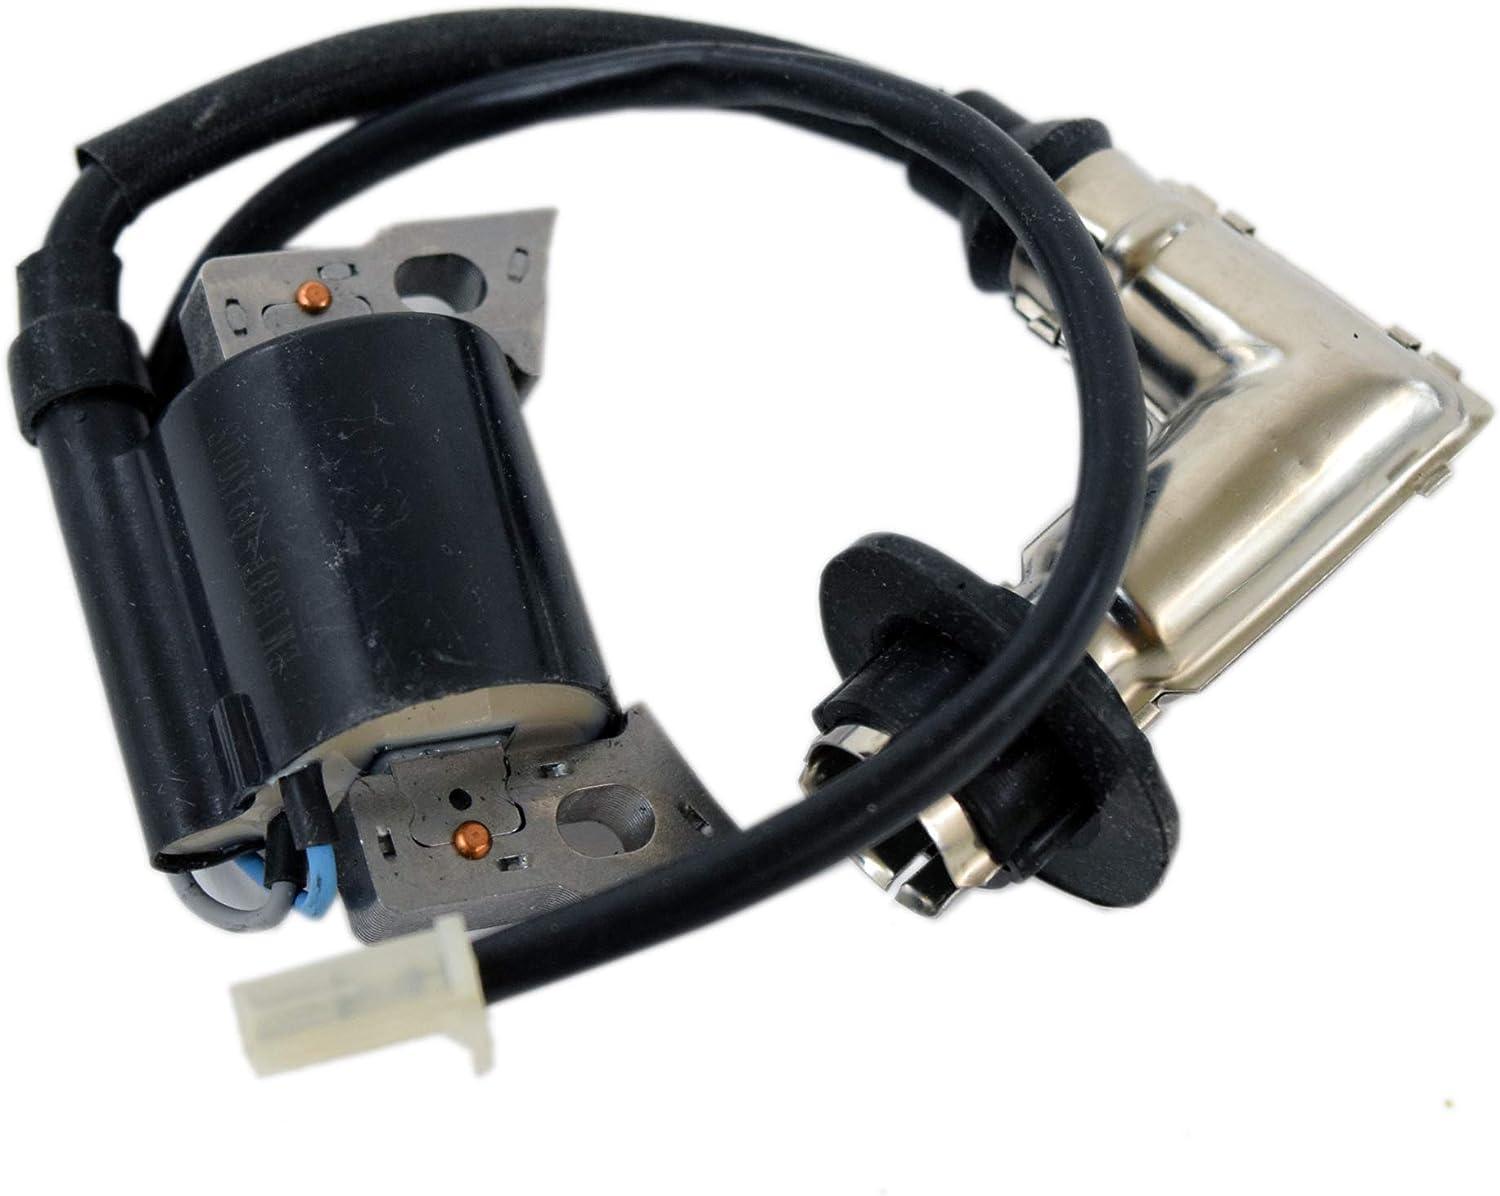 Hipa GA2058A Ignition Coil Compatible with Briggs & Stratton 030651 030700 030697 Generators Similar to 317436GS - hipaparts